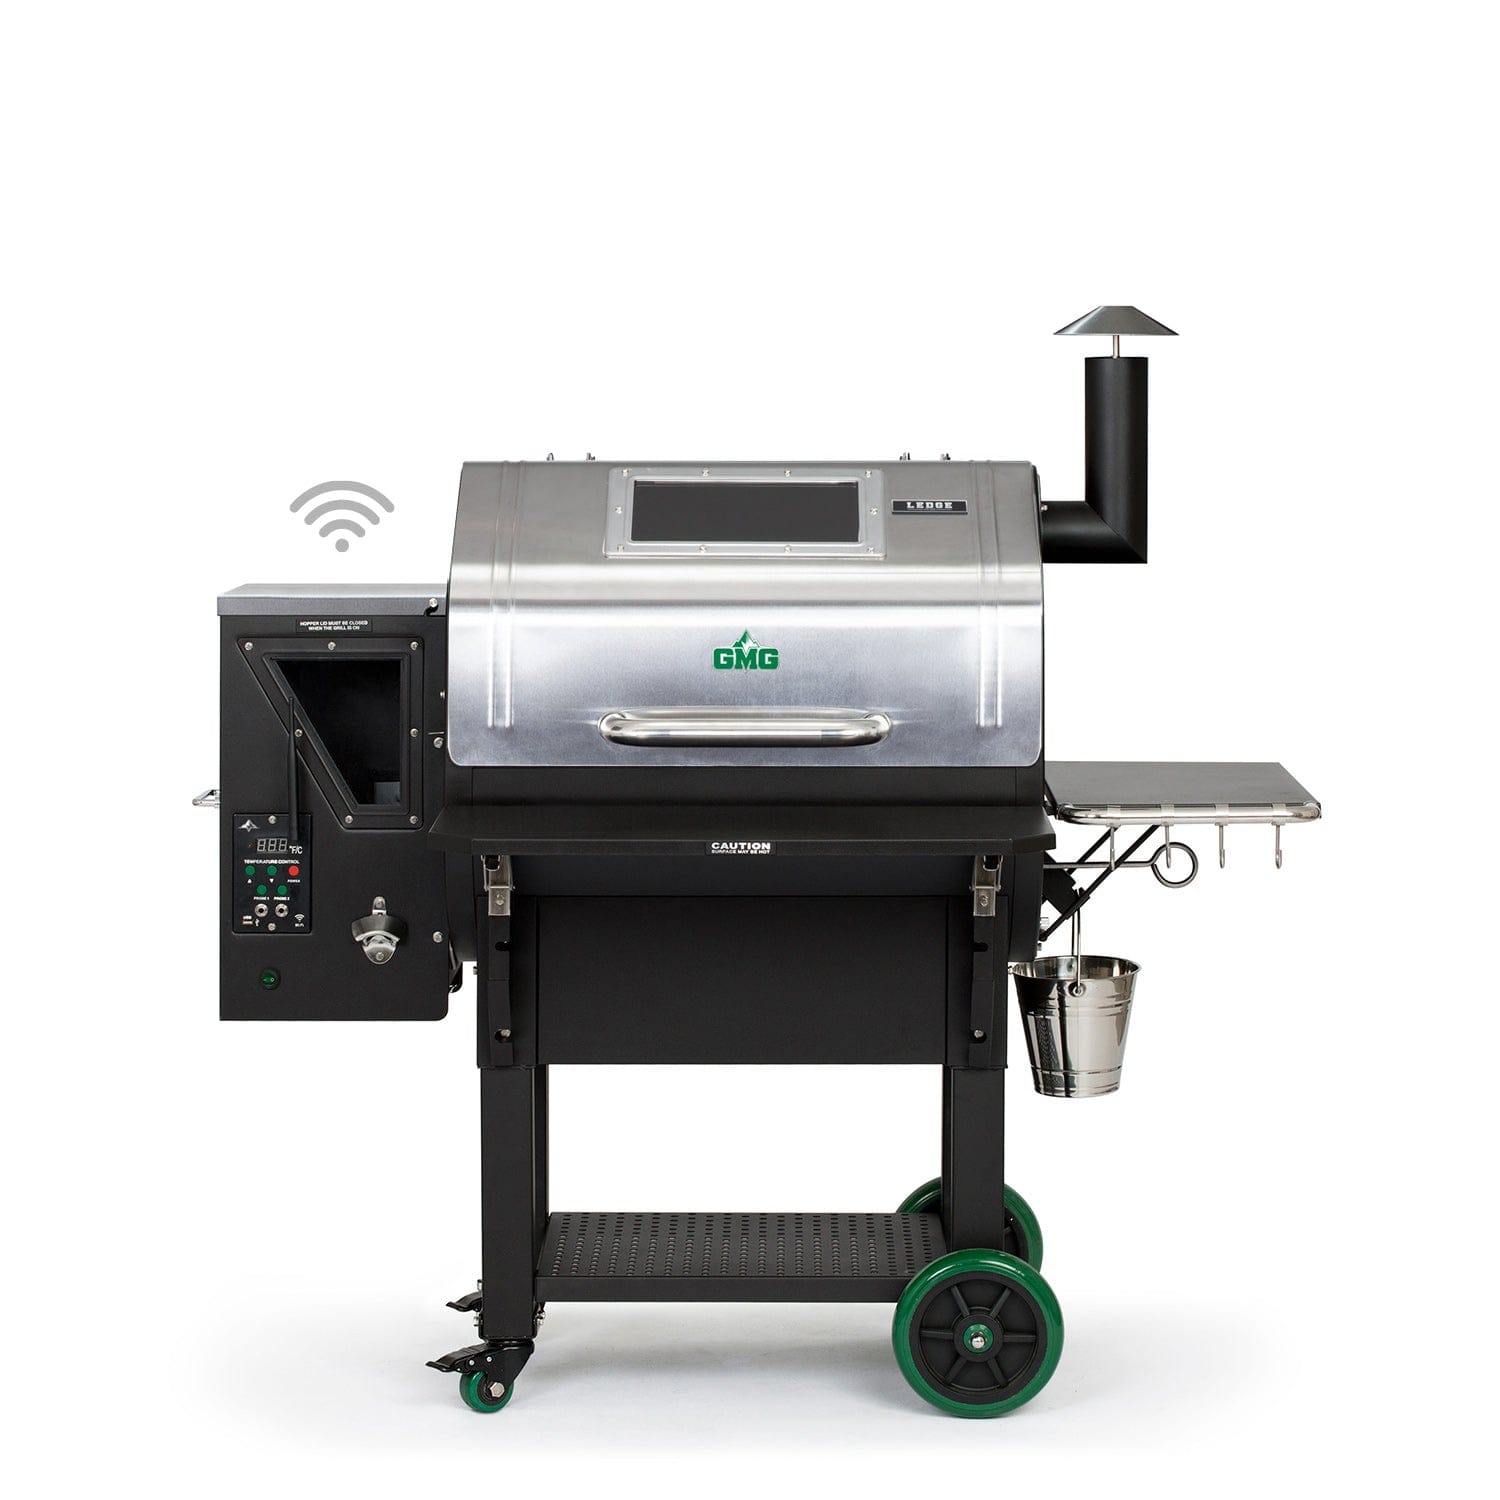 Green Mountain Grills - Ledge Prime+ SS WiFi Pellet Grill w/ Stainless Lid